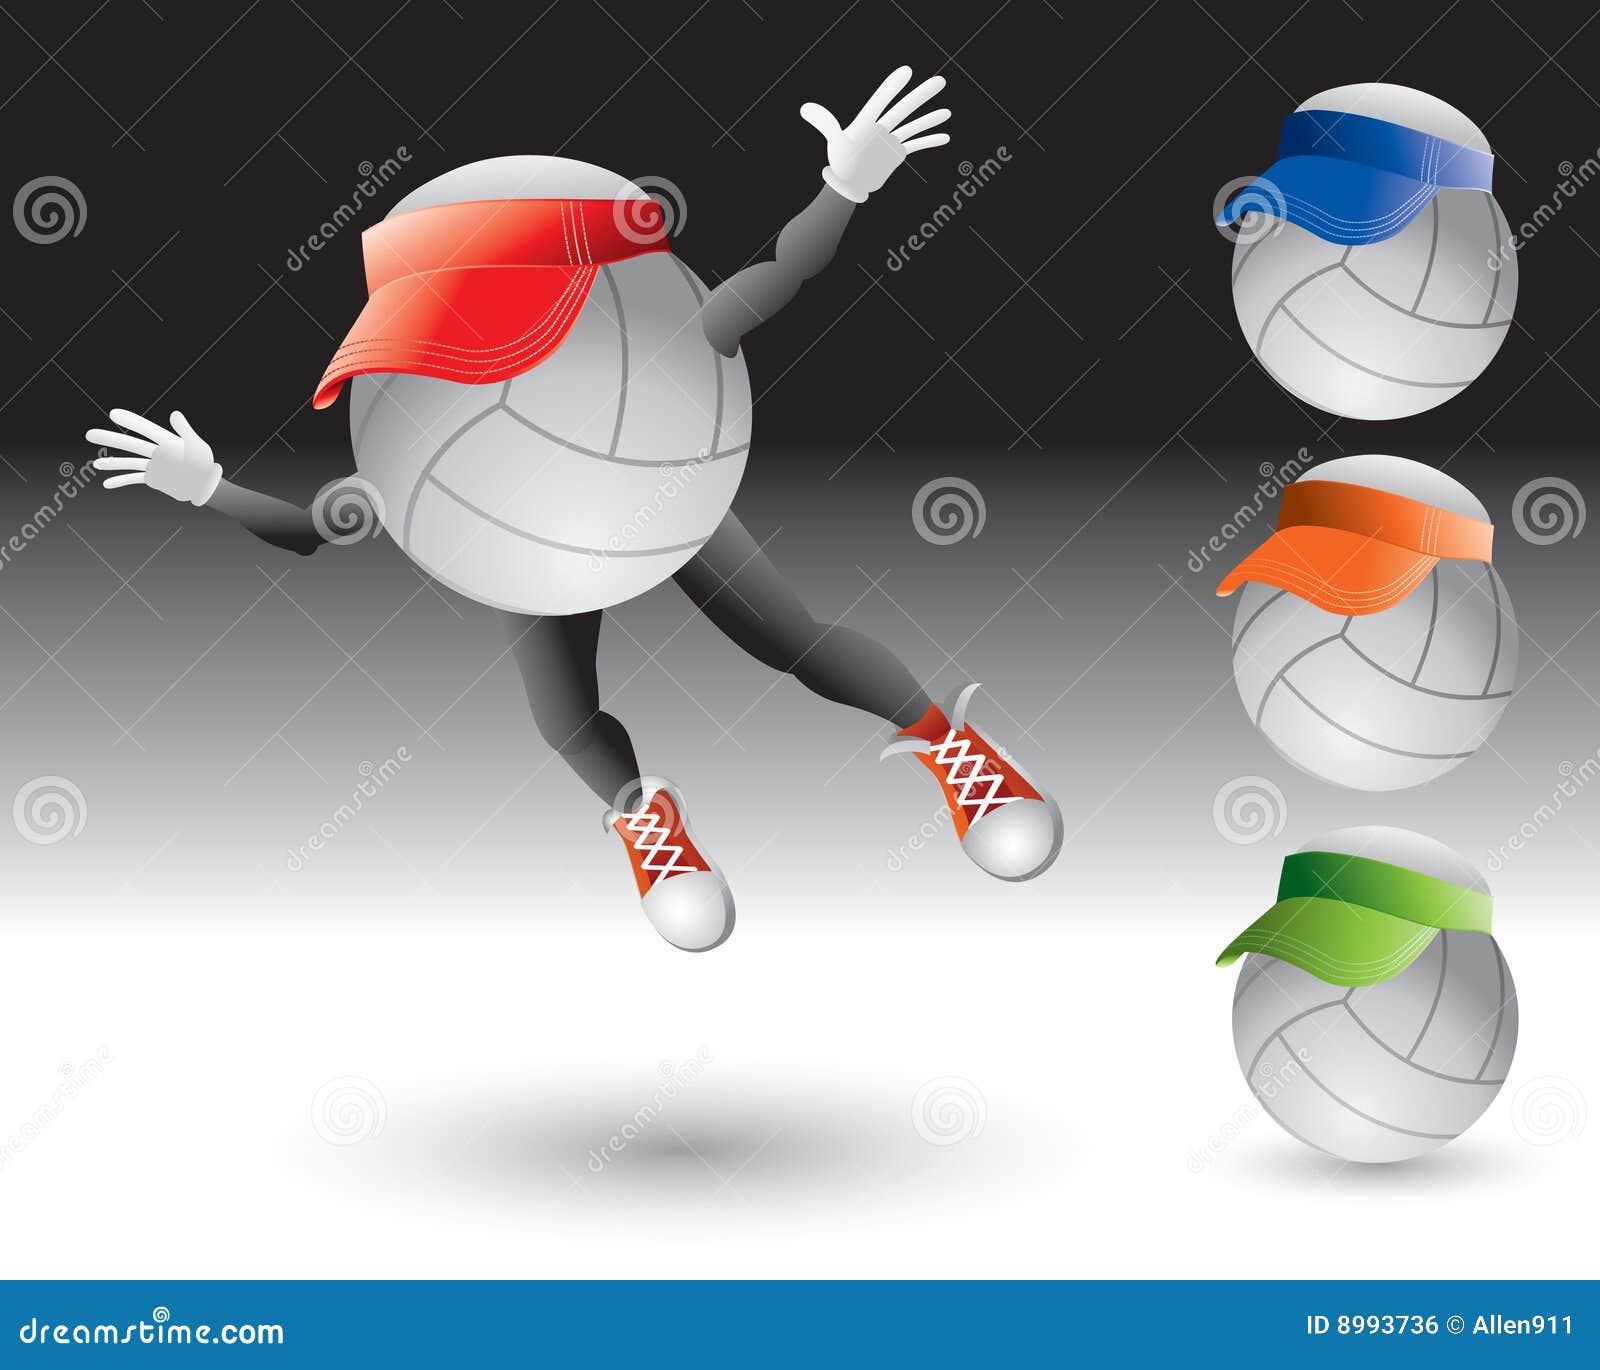 flying volleyball cartoon character with visor